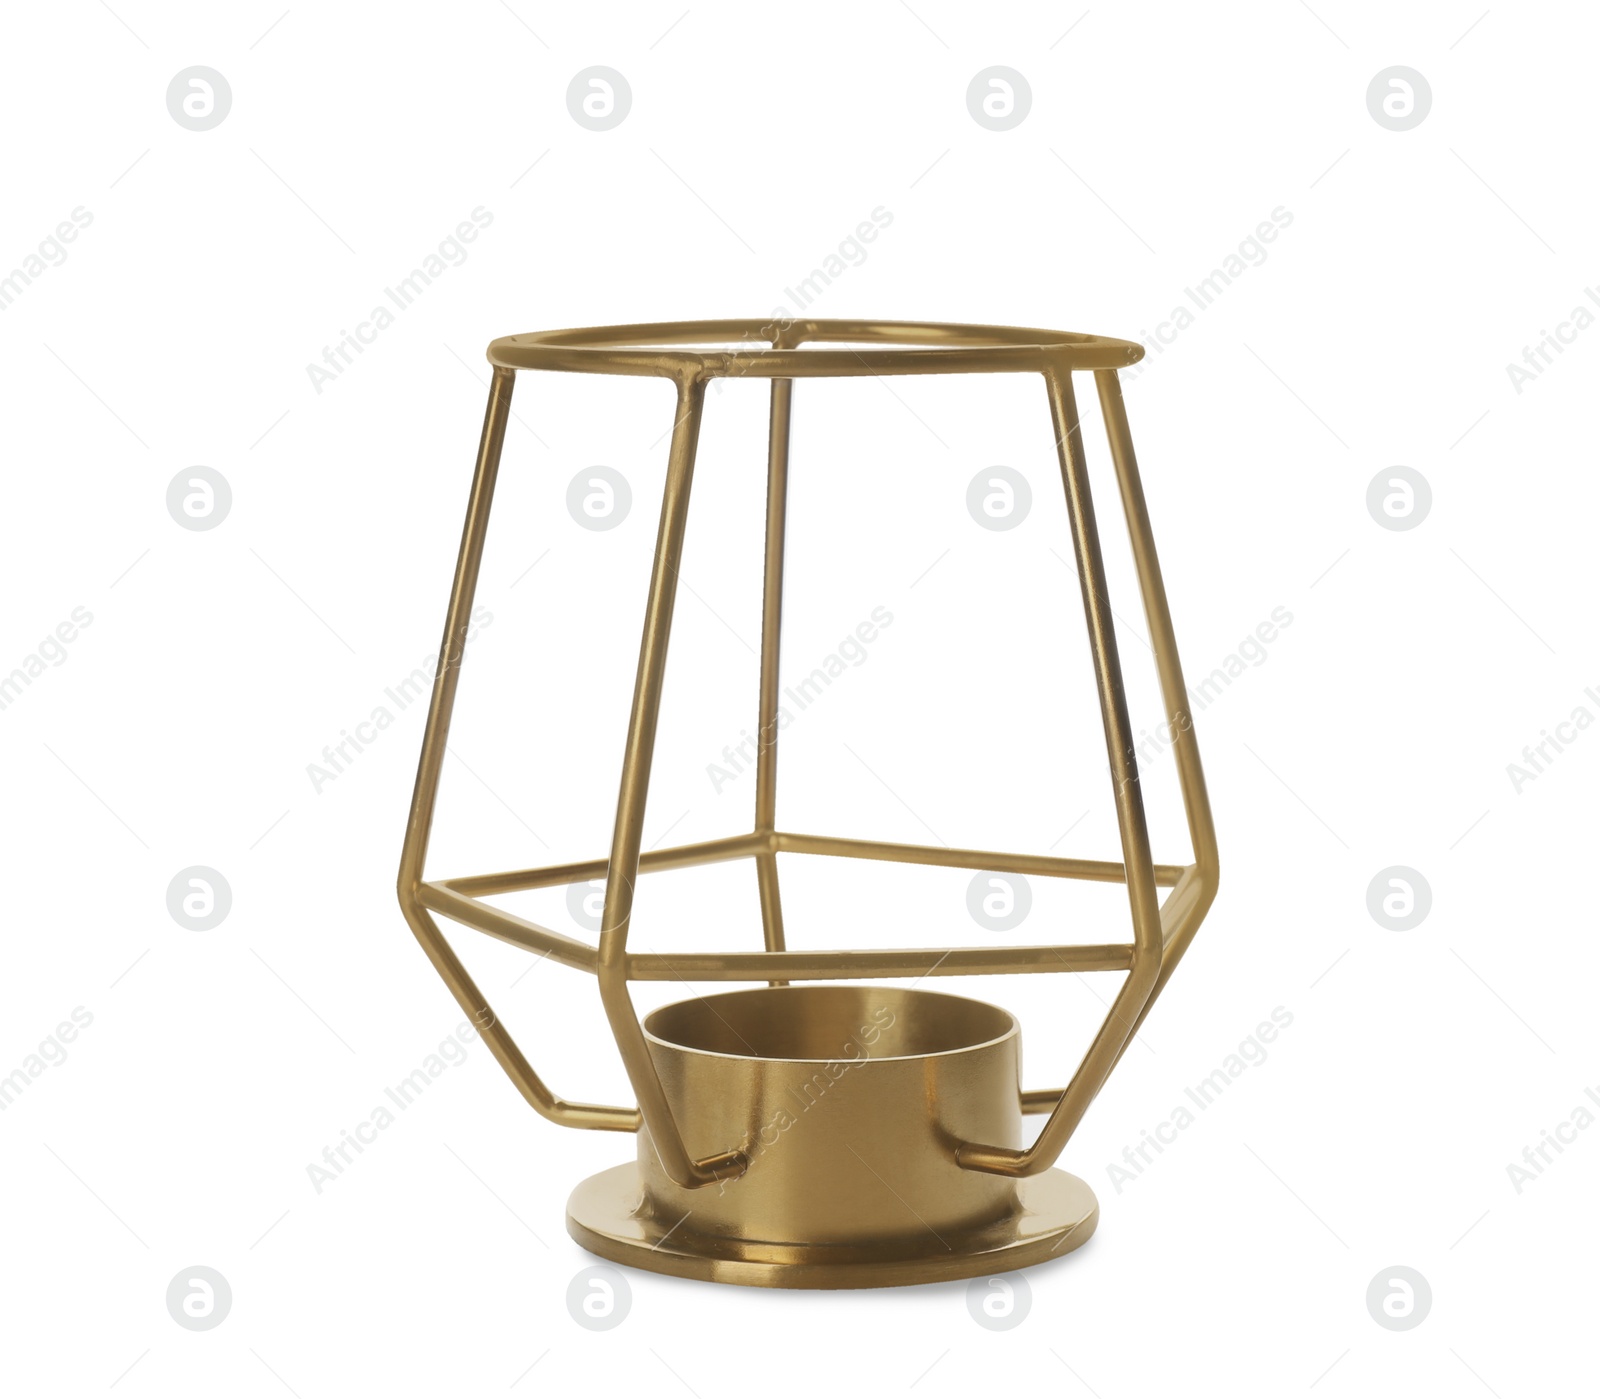 Photo of Vintage metal candle holder isolated on white